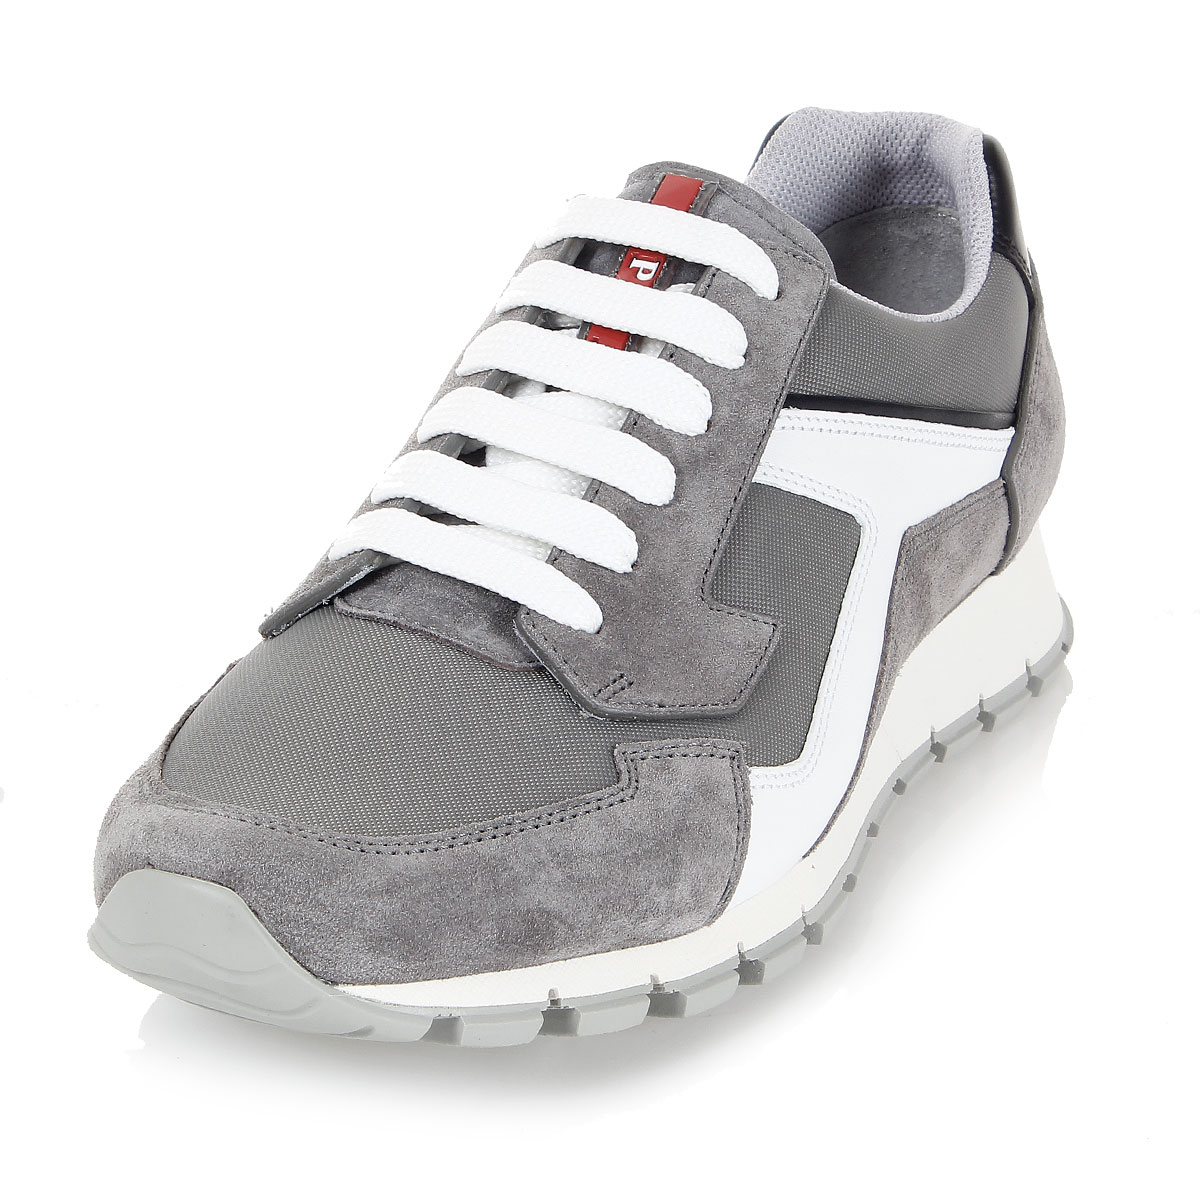 Prada Men Leather and Fabric Sneakers - Spence Outlet  